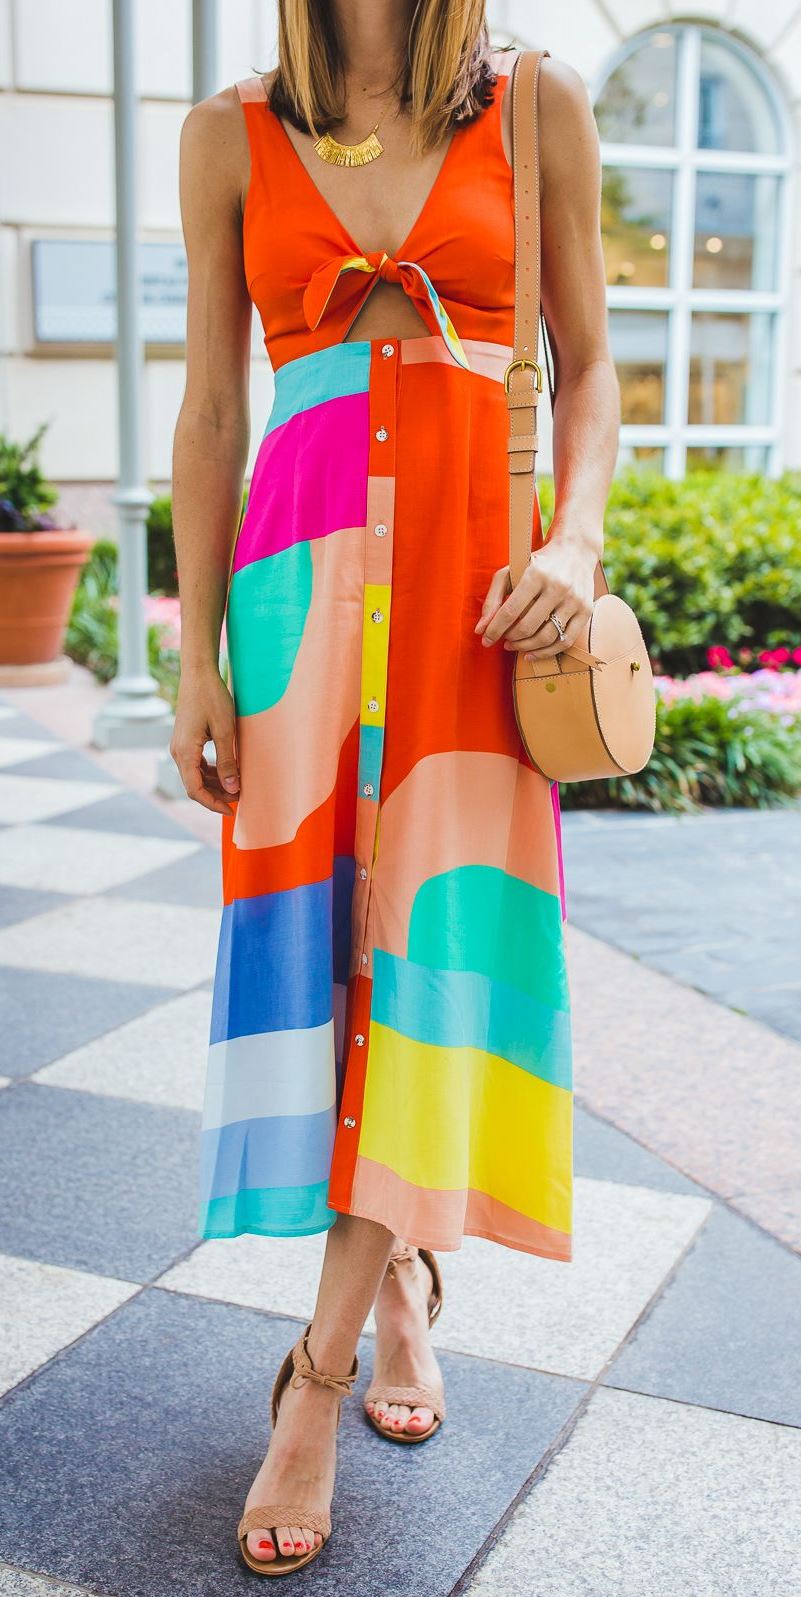 gorgeous summer outfit idea / nude round bag + colorful dress + sandals